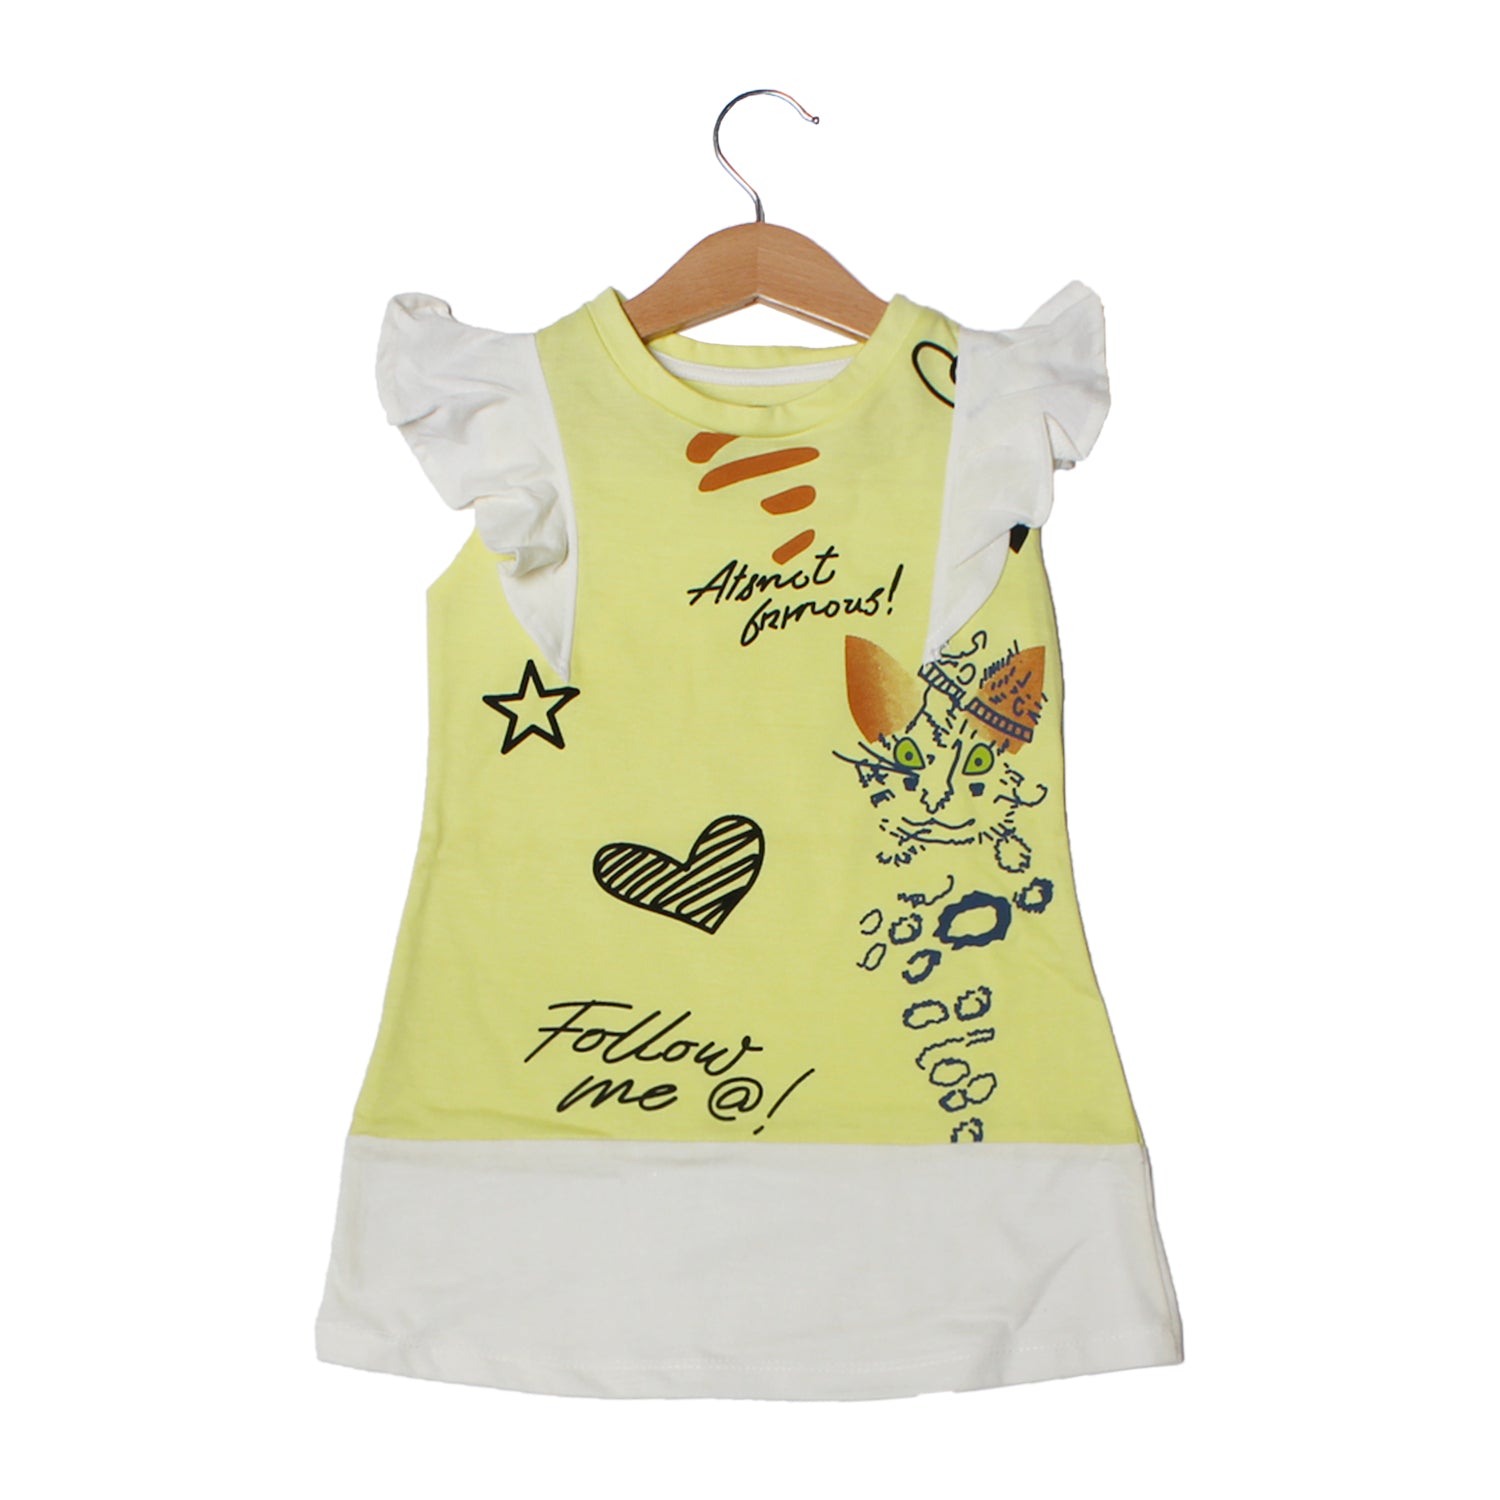 NEW YELLOW WITH WHITE SLEEVES FOLLOW ME PRINTED T-SHIRT TOP FOR GIRLS